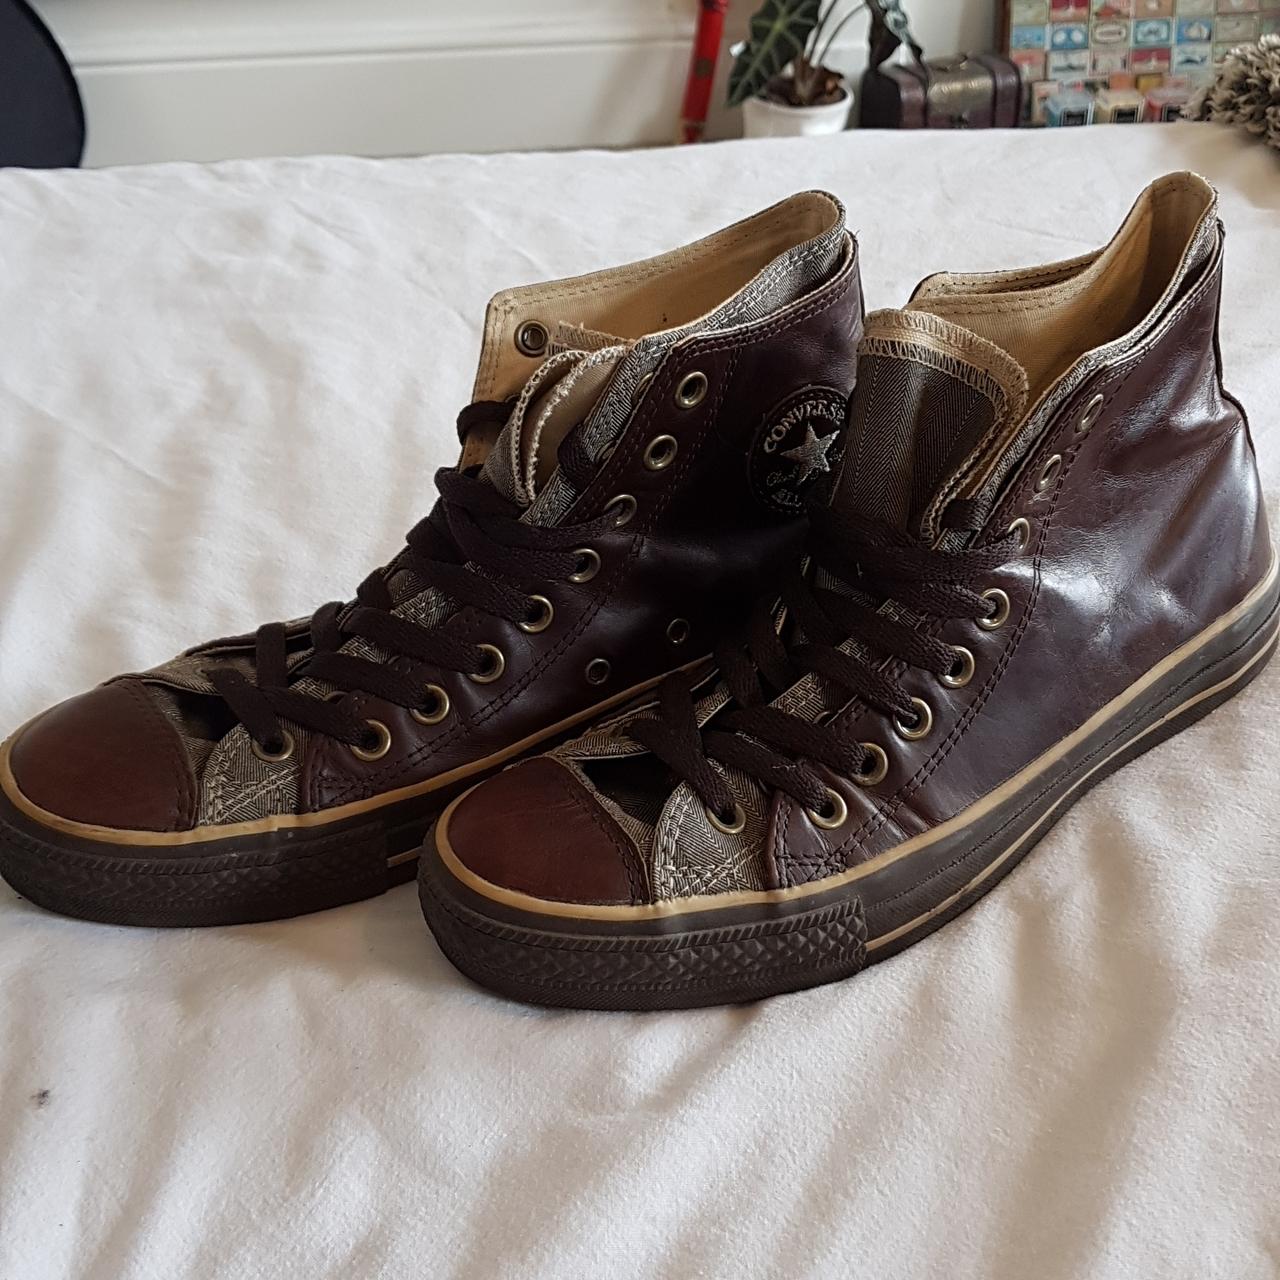 Brown leather converse with detailing. Mens size 8 - Depop